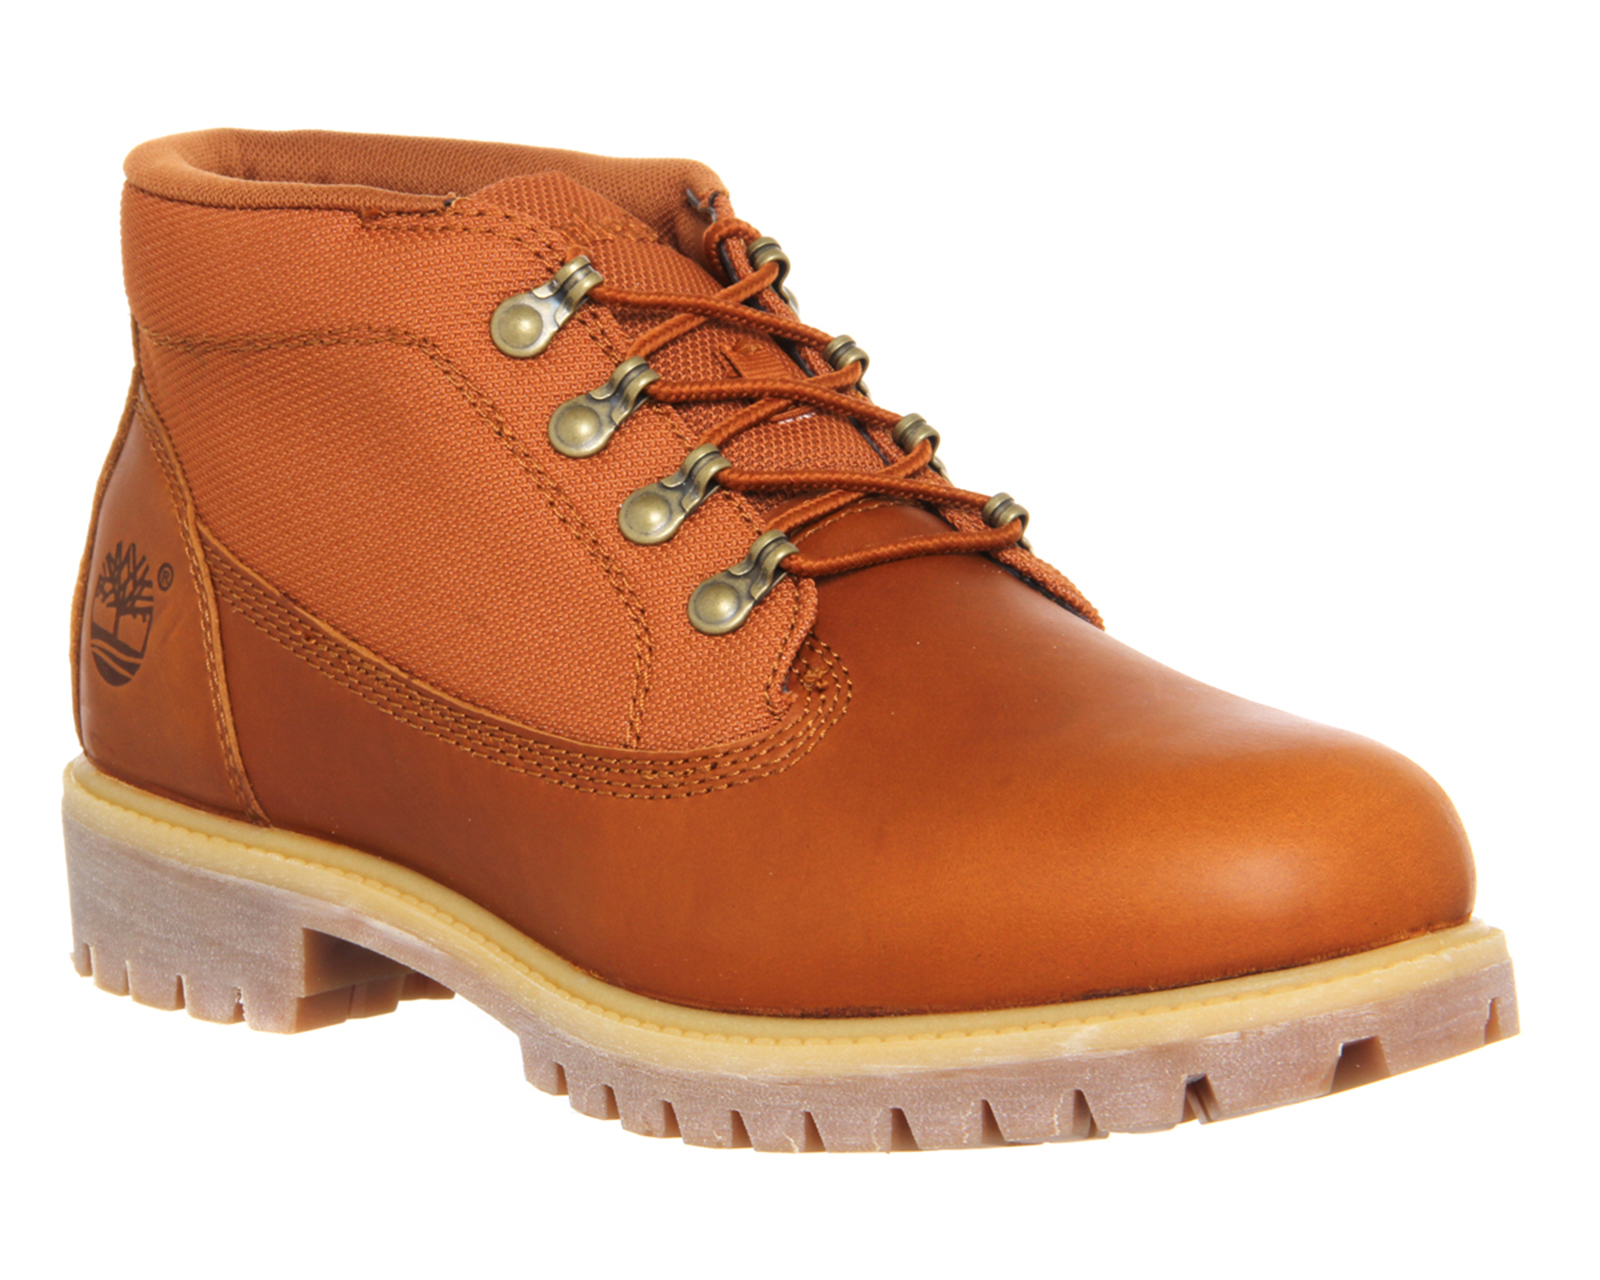 Timberland Campsite Chukka Boots Exclusive in Brown for Men - Lyst